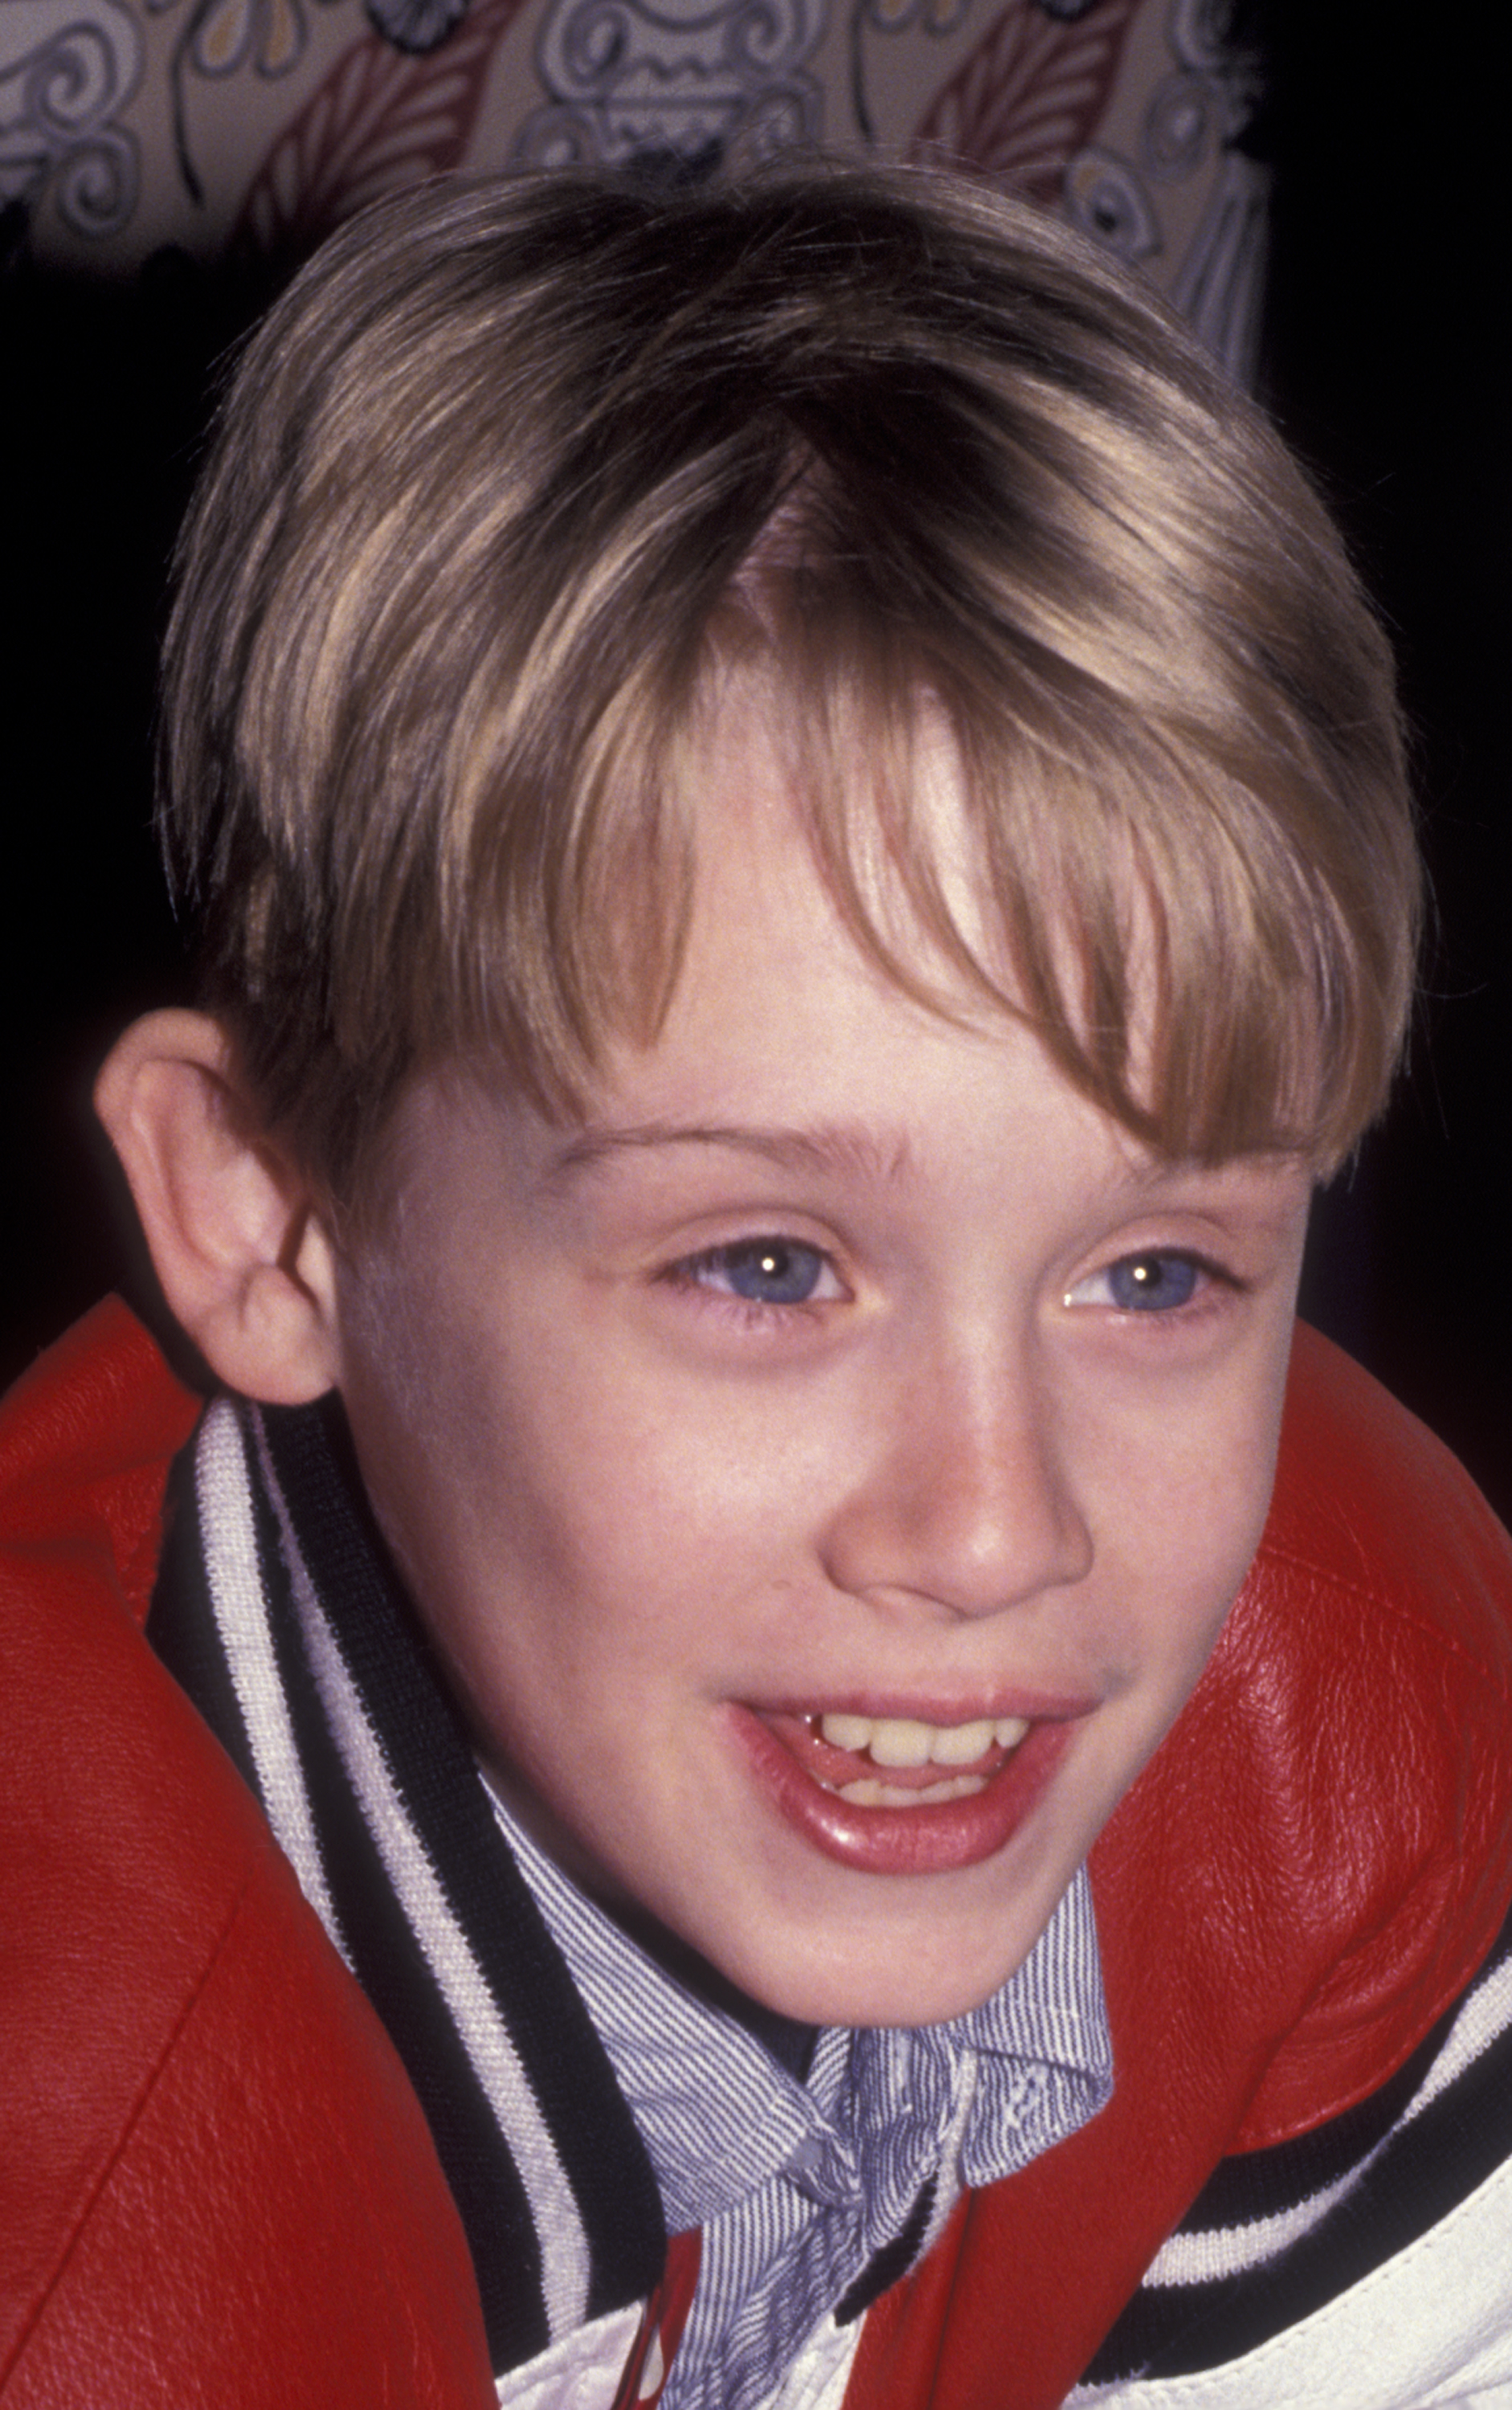 Macaulay Culkin at the Ford Modeling Agency Press Conference in New York City on December 11, 1991 | Source: Getty Images